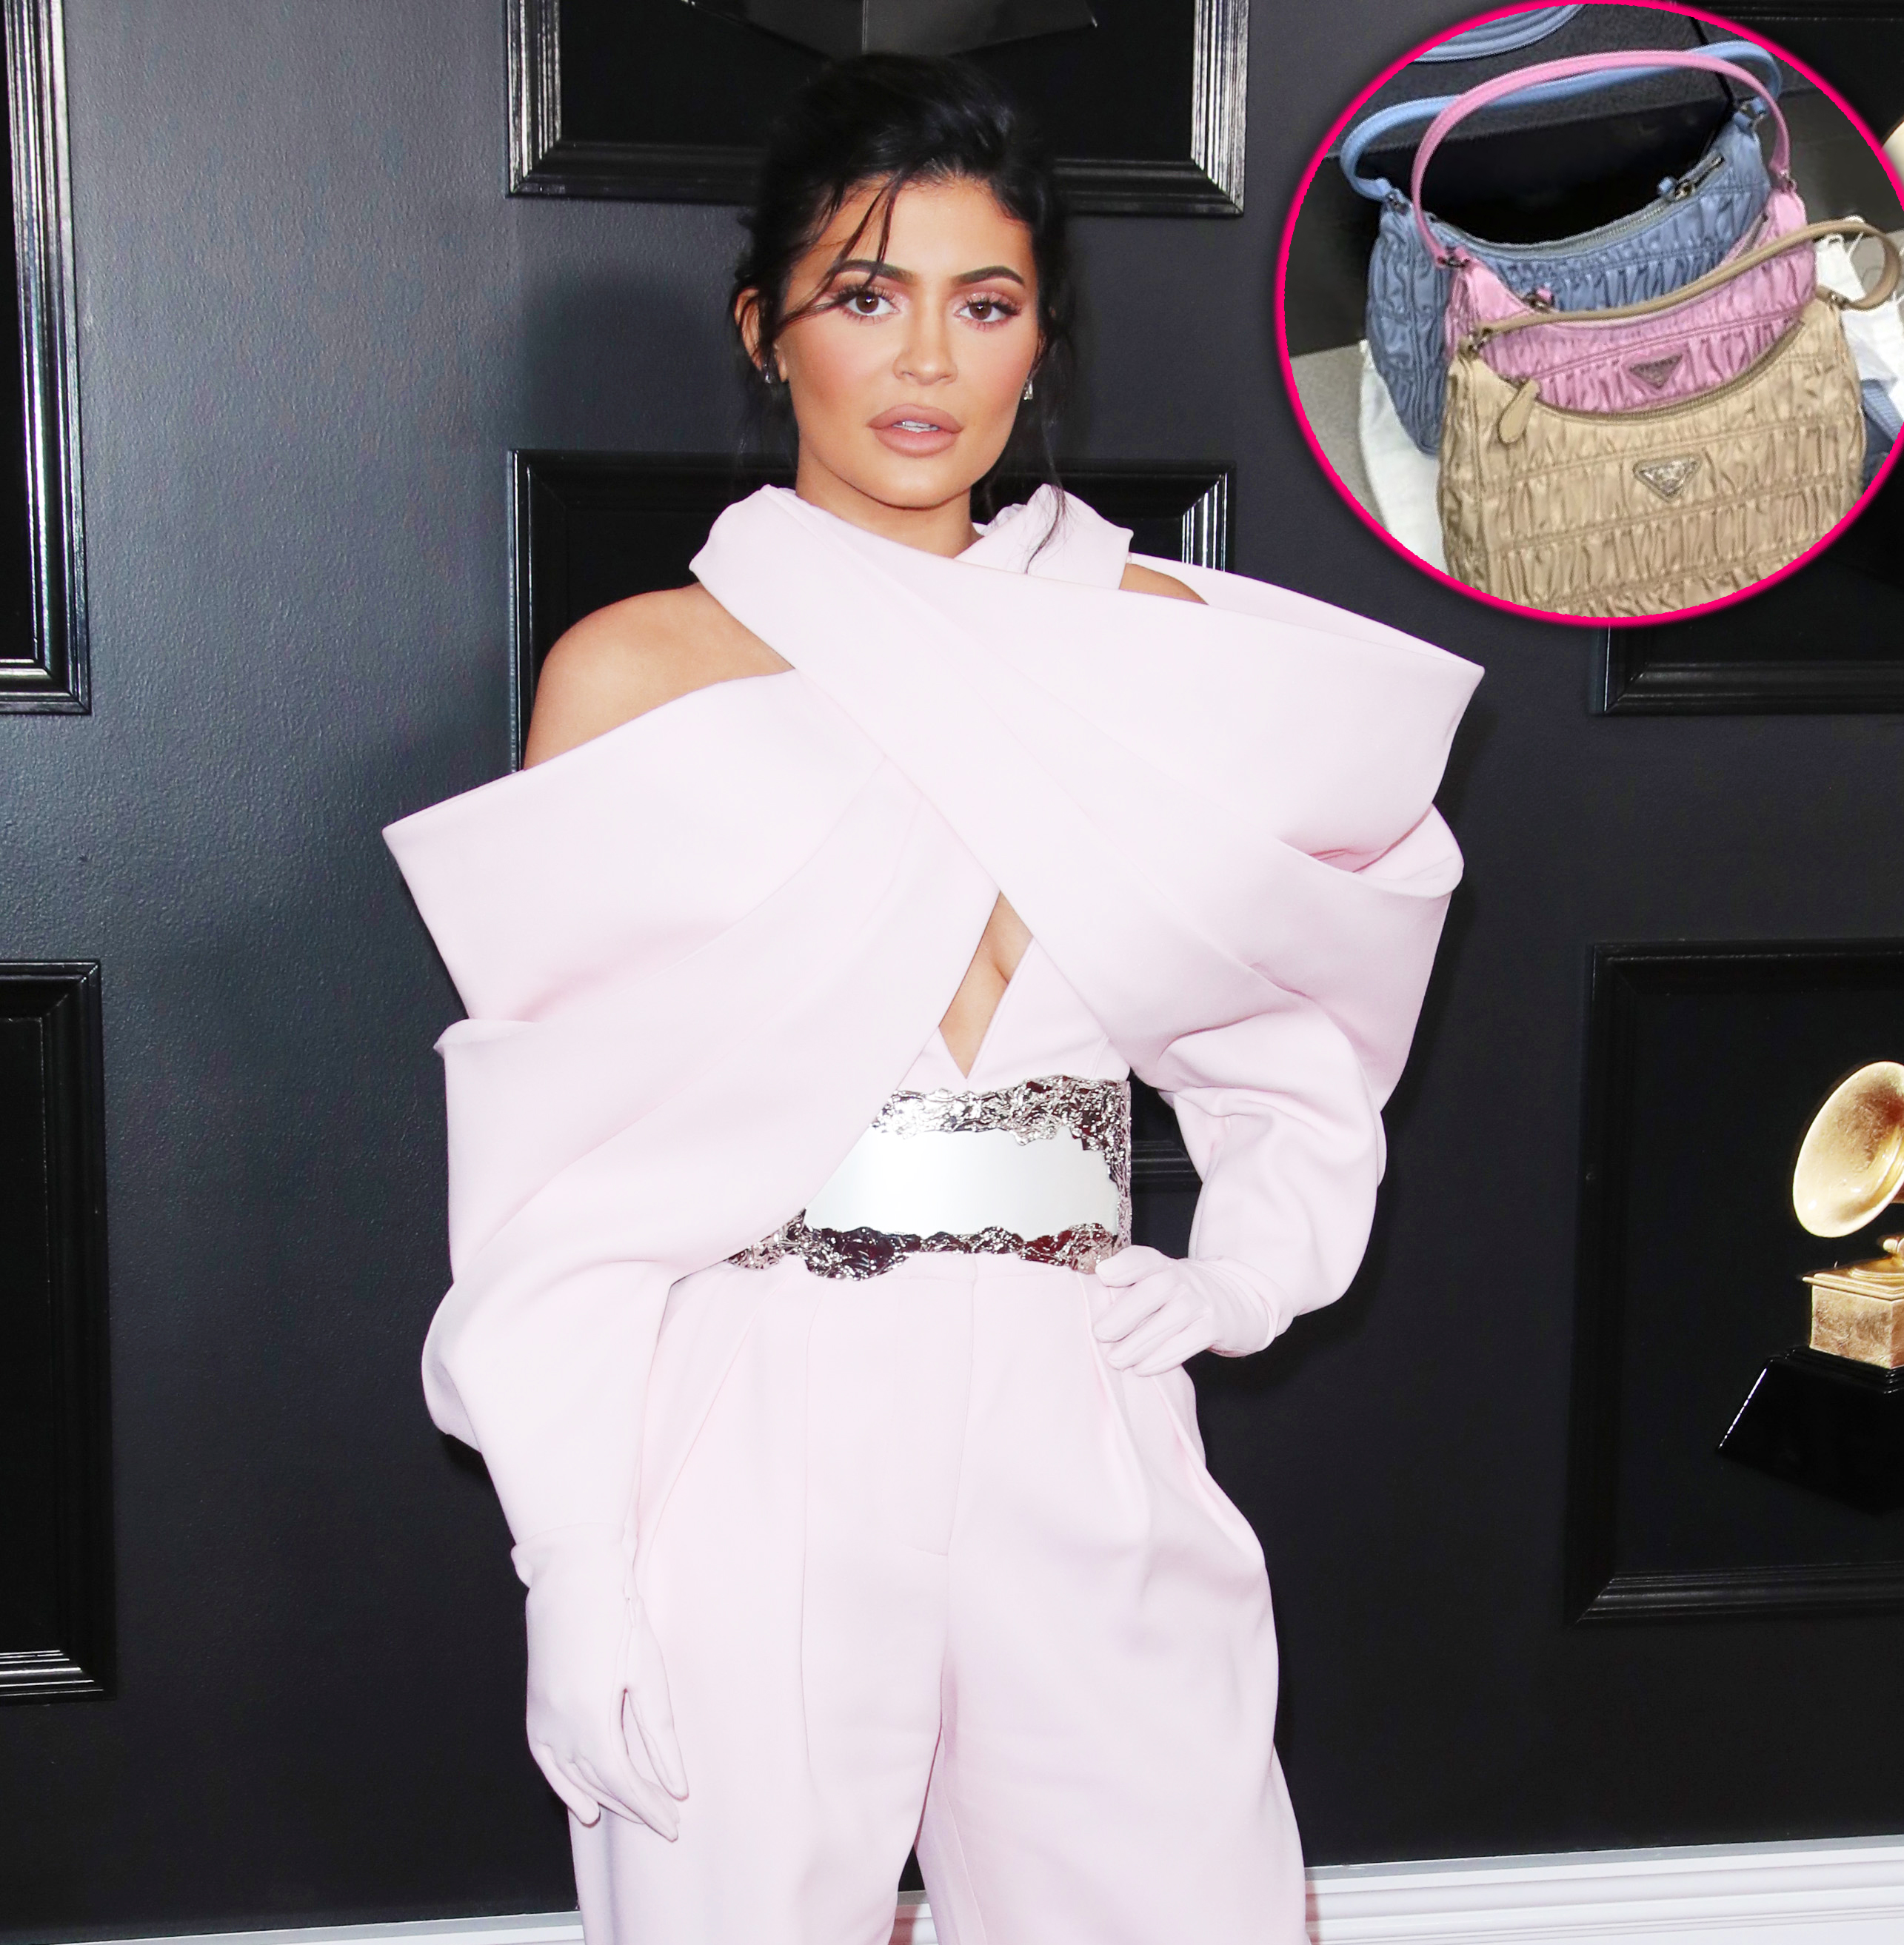 Kylie Jenner poses with $8,000 Hermes bag and $500 Prada hat after